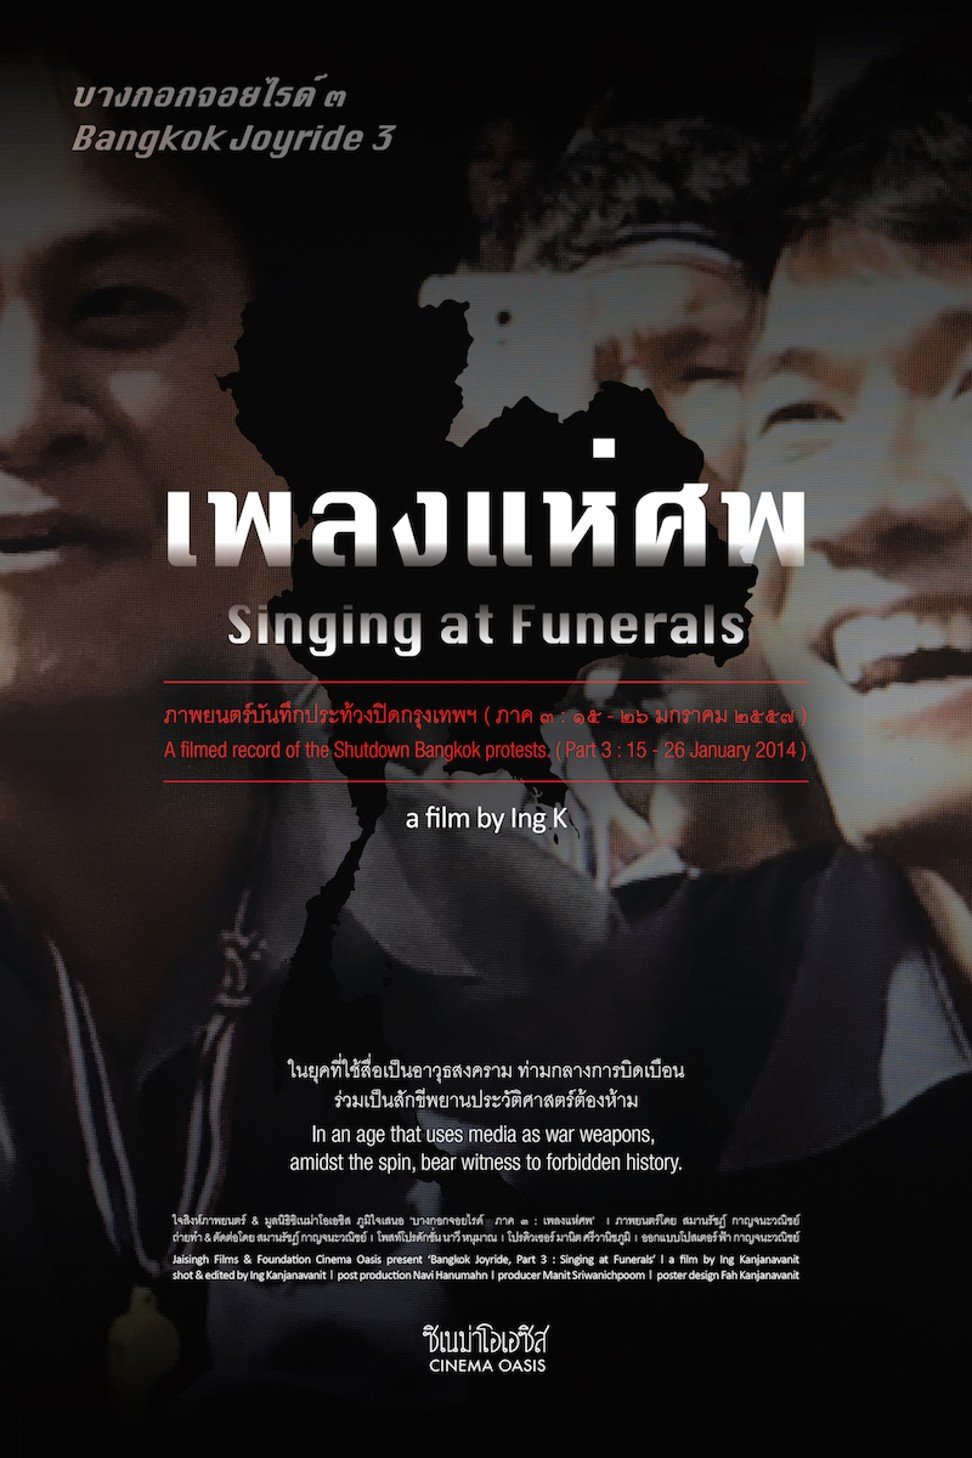 A poster for a film about Bangkok’s street protests.